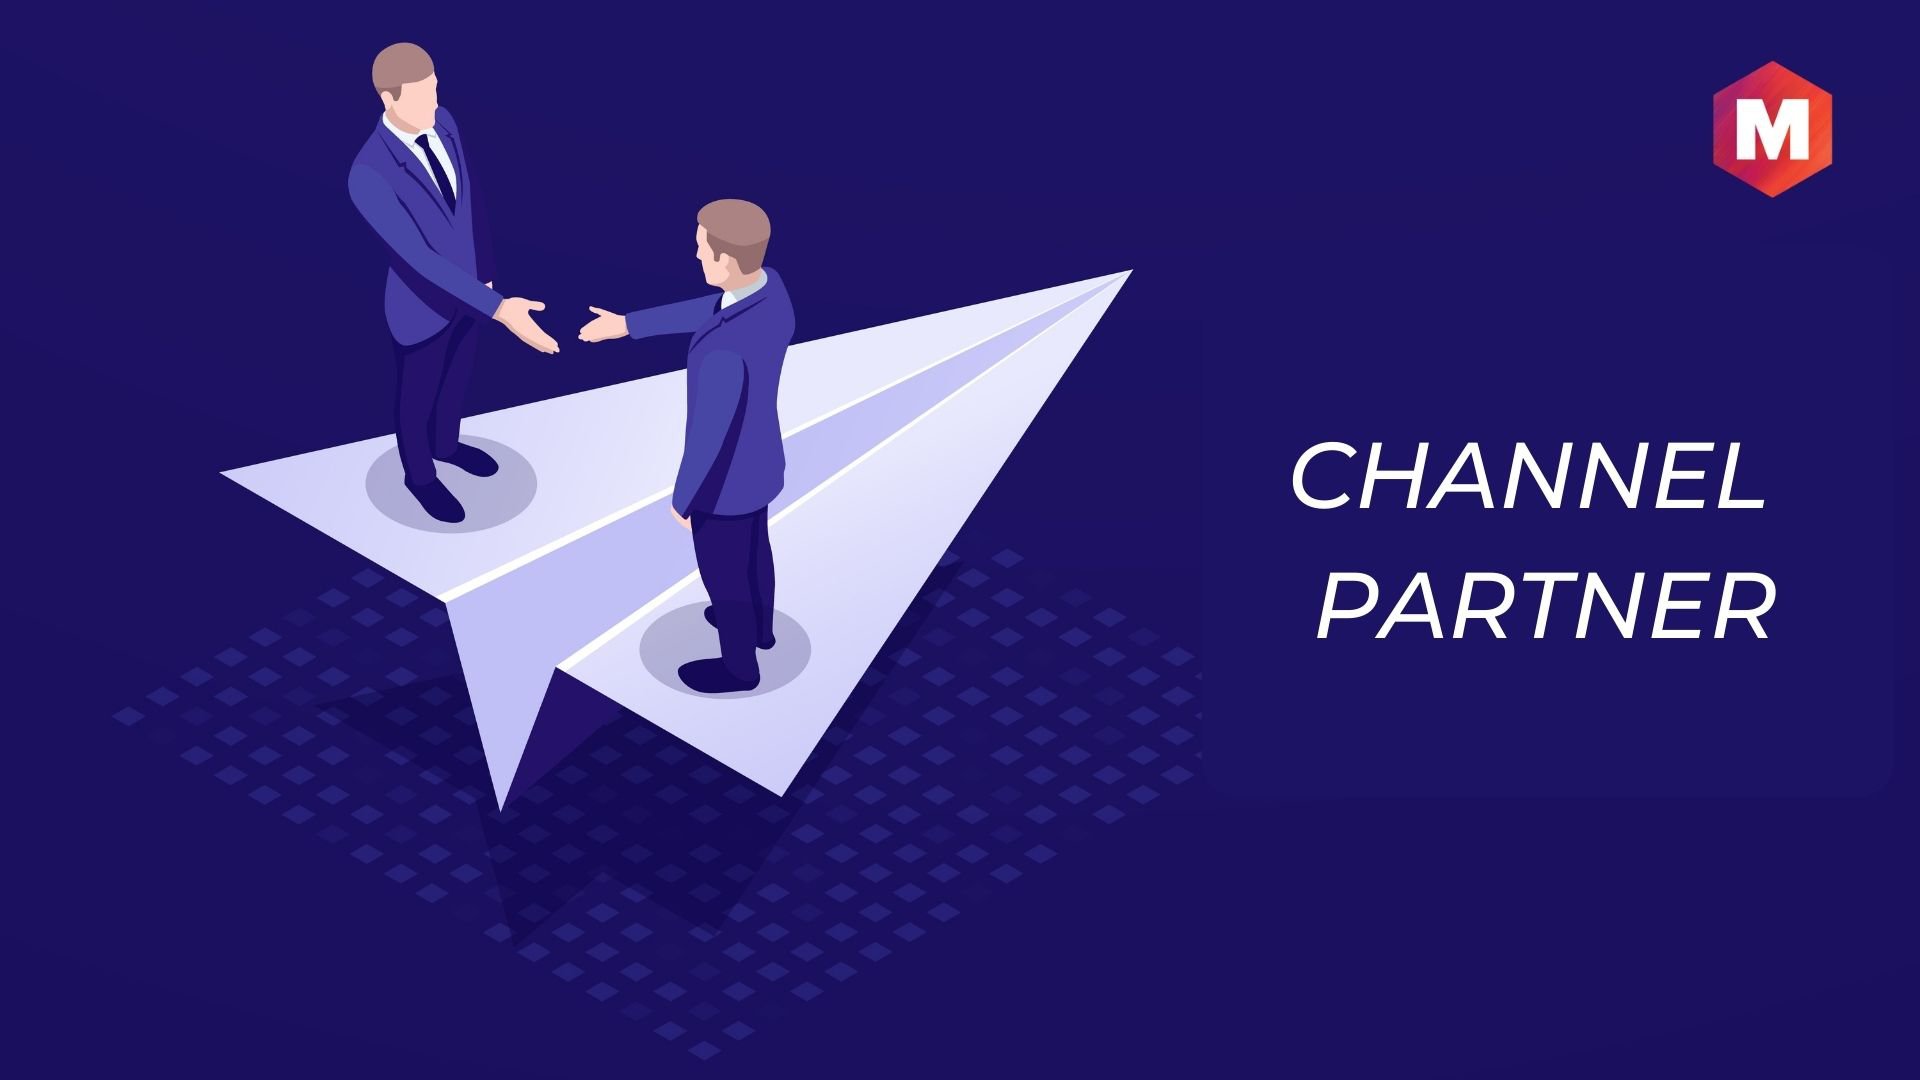 Channel Partner Definition, Benefits and Types Marketing91